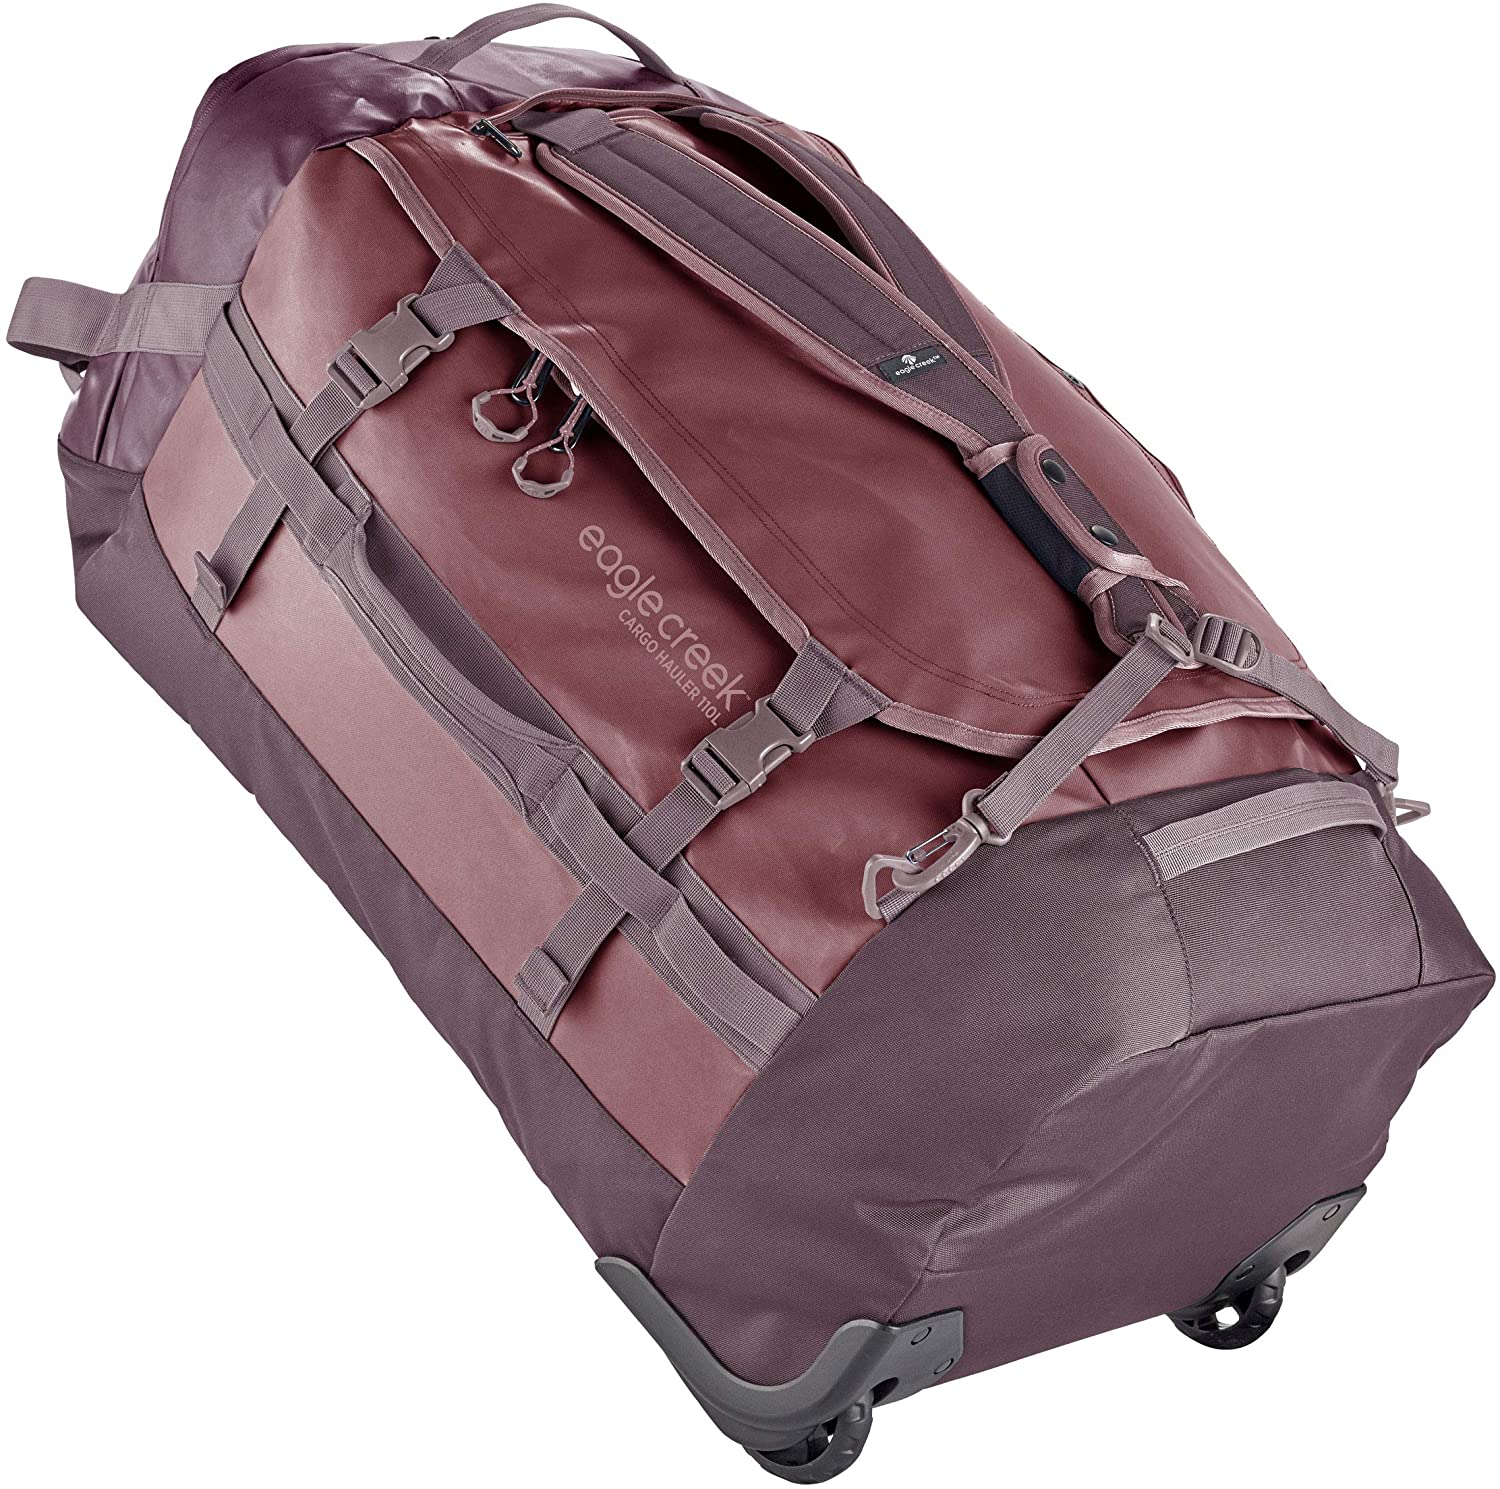 Eagle Creek Cargo Hauler Wheeled Duffel 110L in Earth Red color from the front